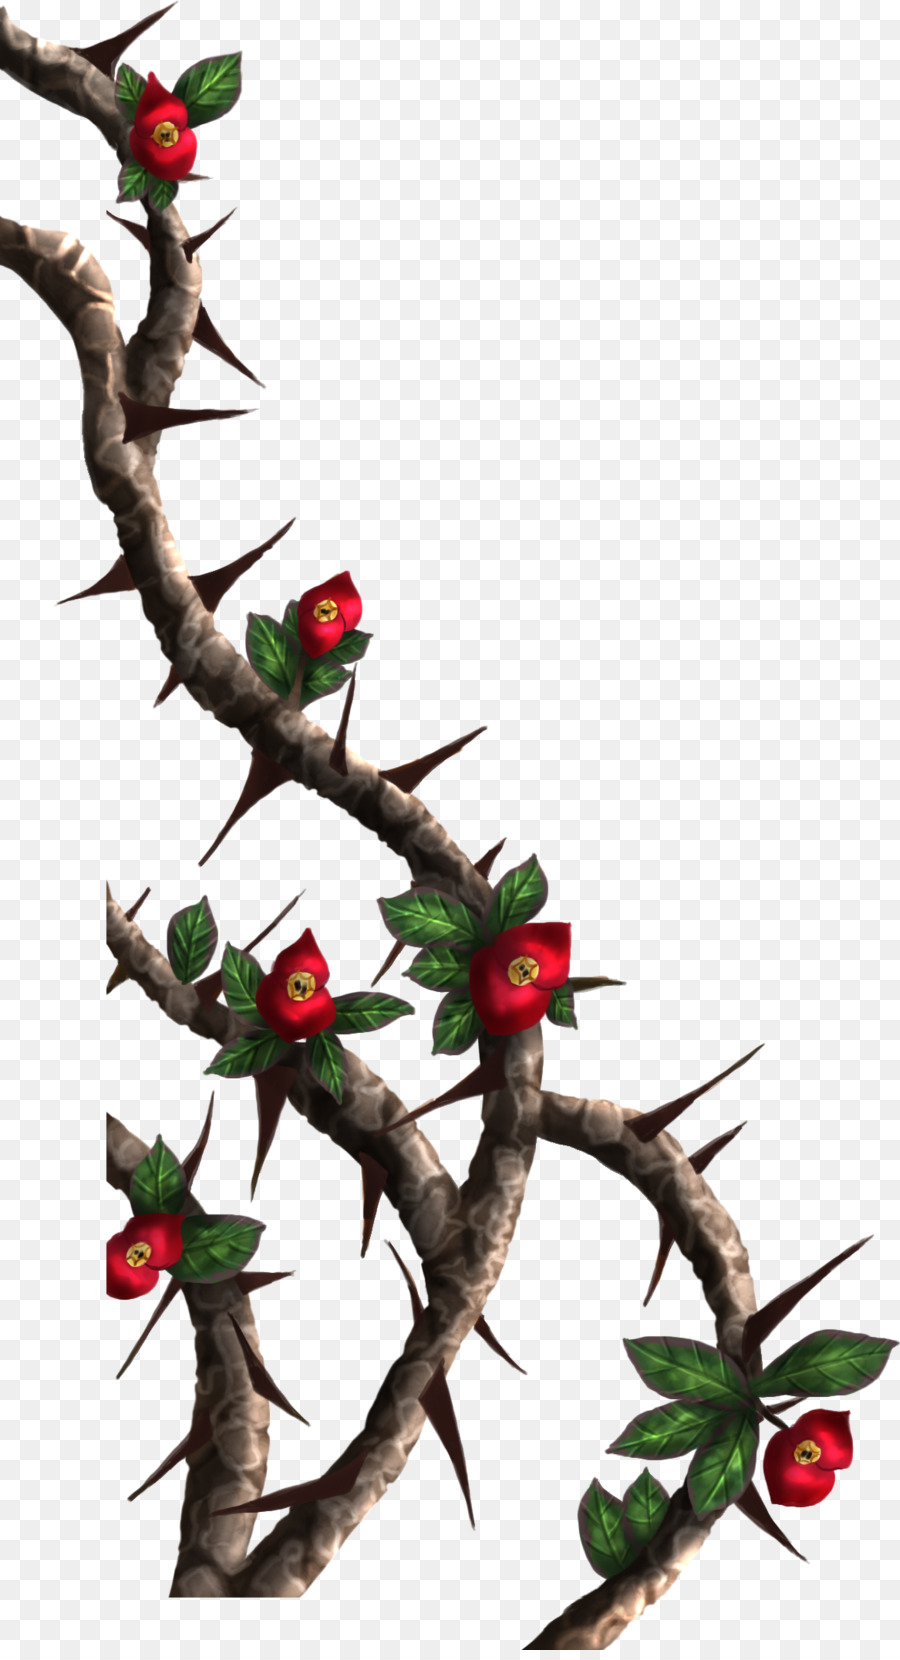 Thorns, spines, and prickles Rose Crown of thorns Drawing Clip art - thorn png download - 900*1650 - Free Transparent Thorns Spines And Prickles png Download.